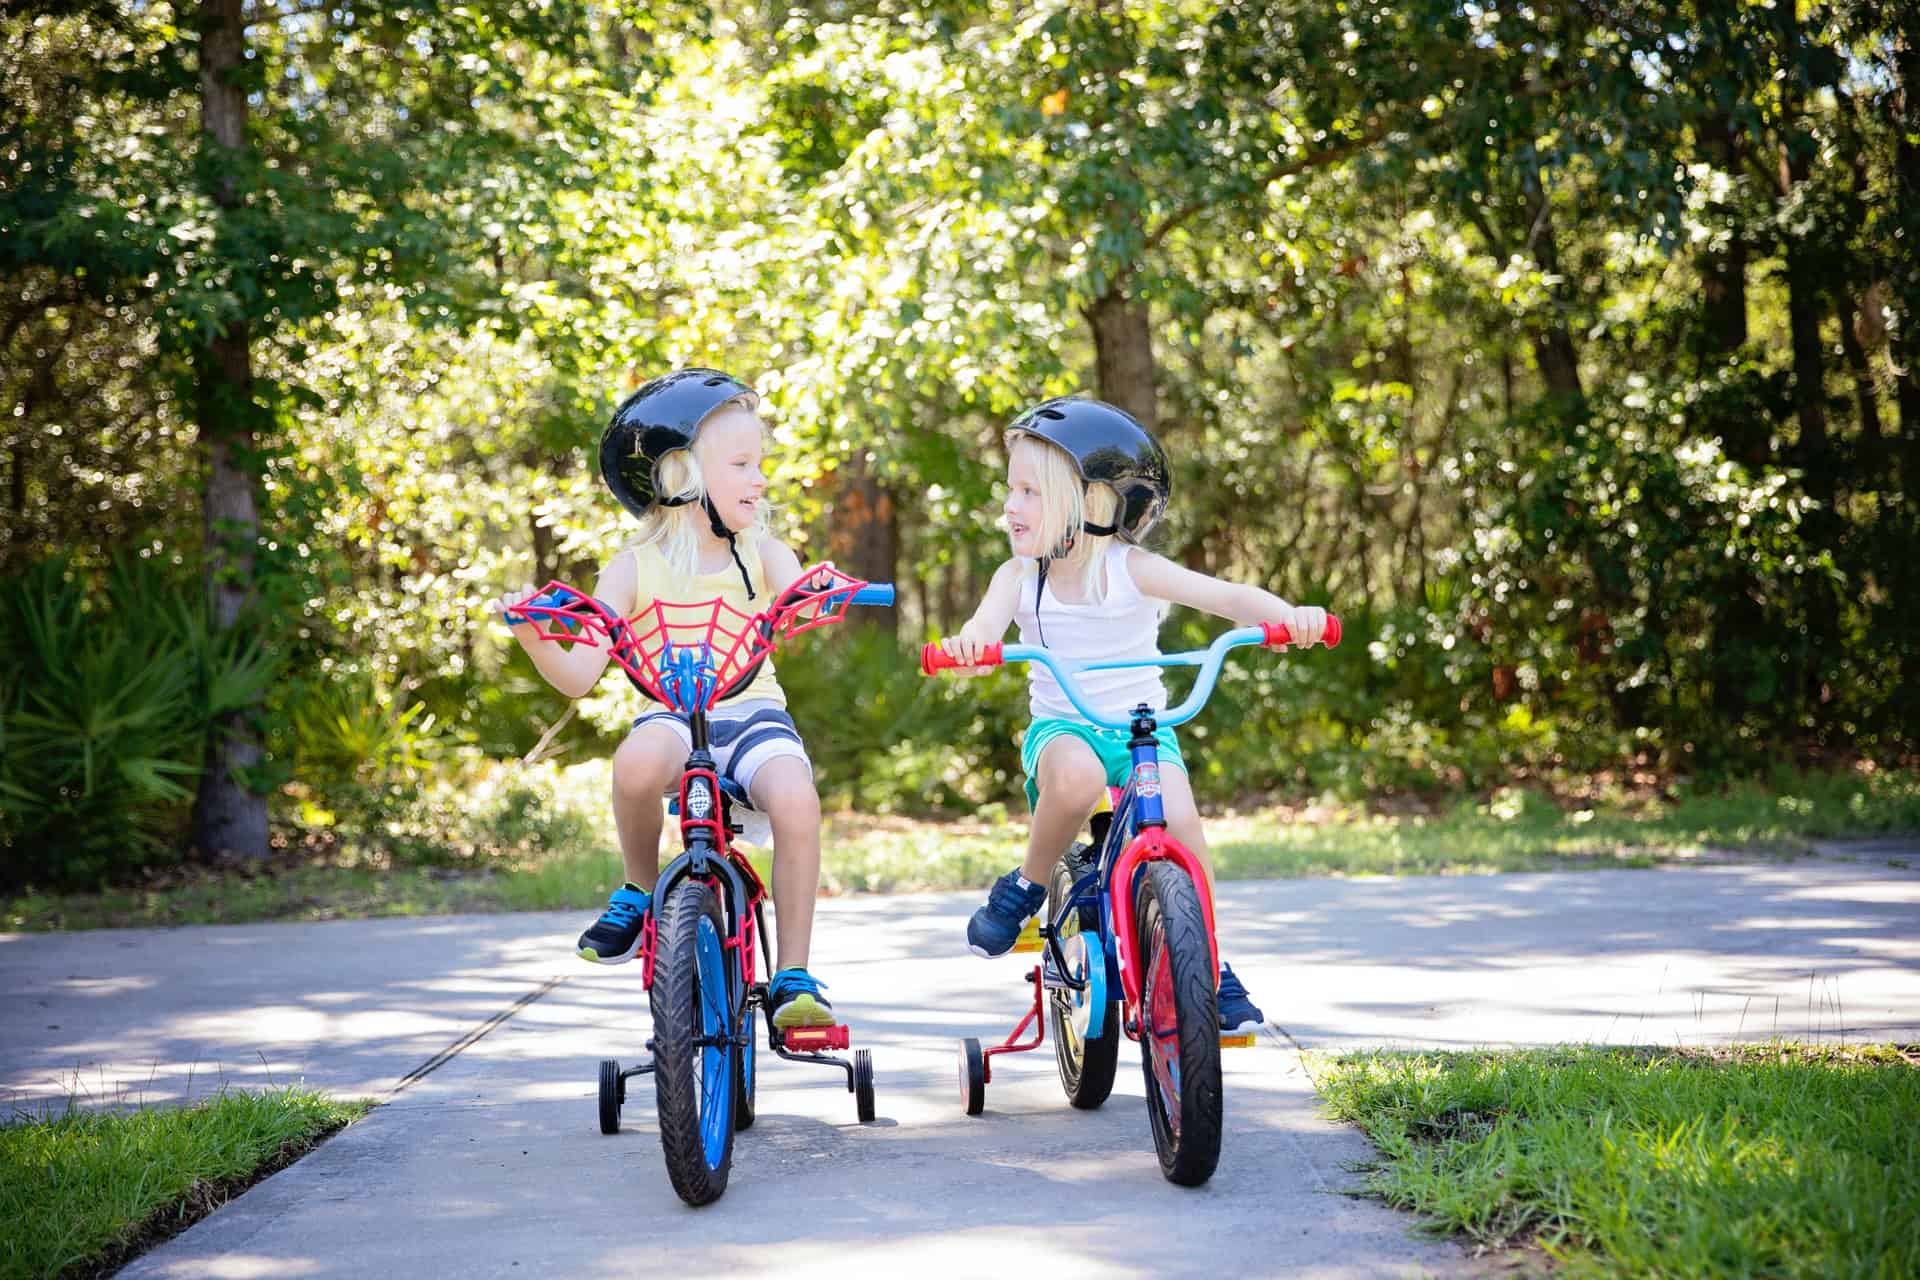 Bicycle for a child – which one to choose?